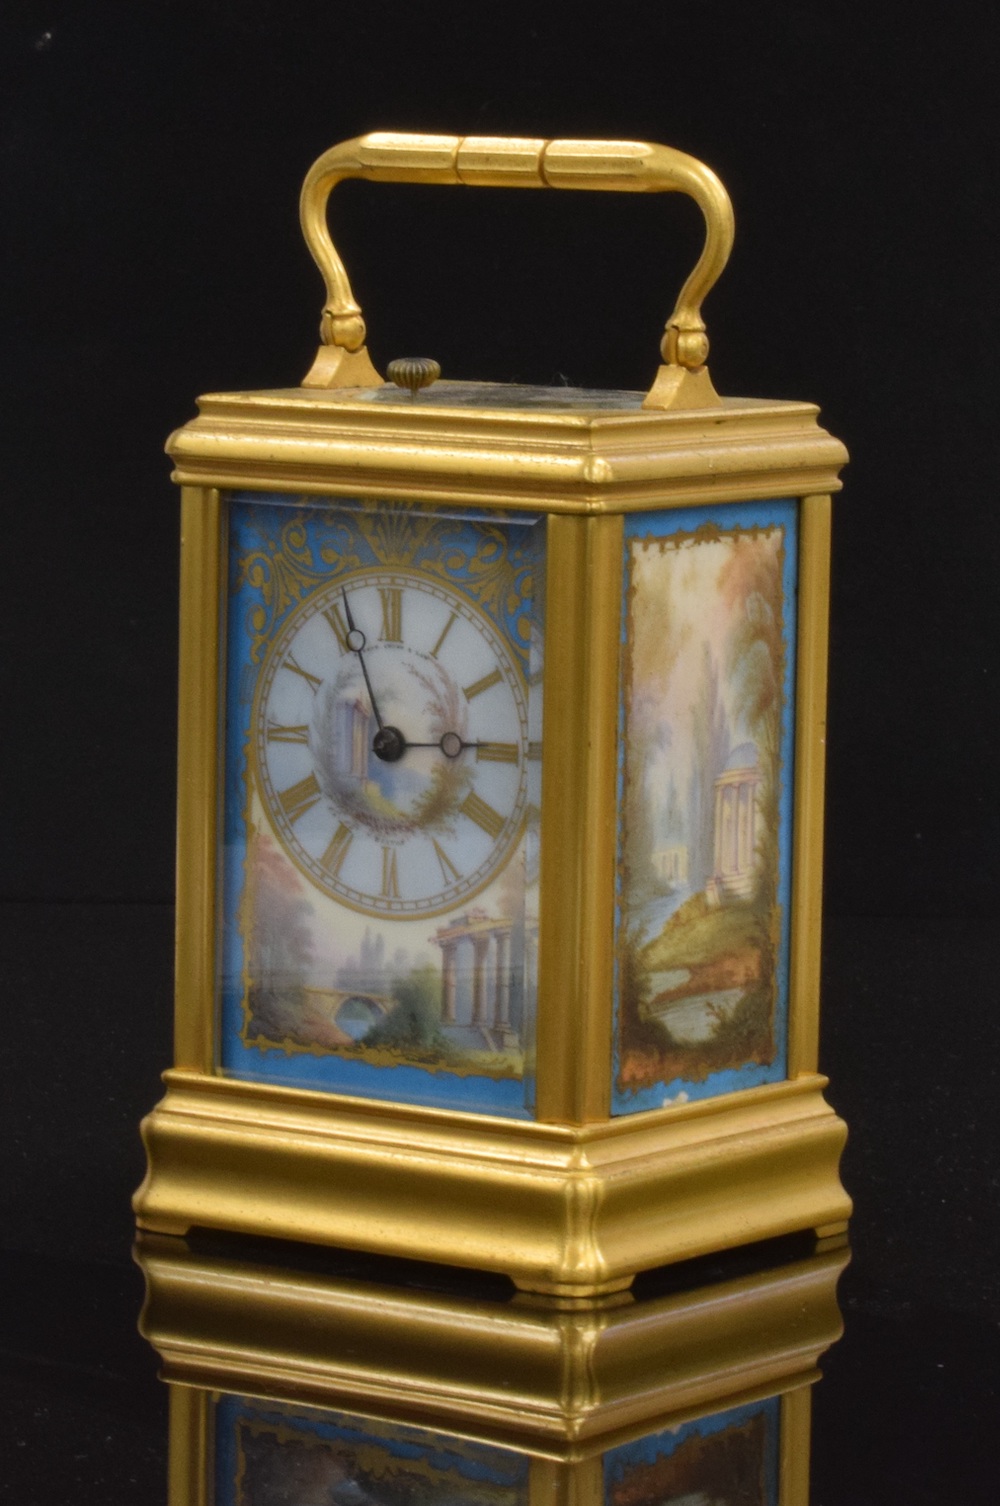 Shreve Crum & Low Of Boston Massachusetts Gilt Cased Repeater Carriage Clock With Hand Painted Porcelain Panels Sold £2,500